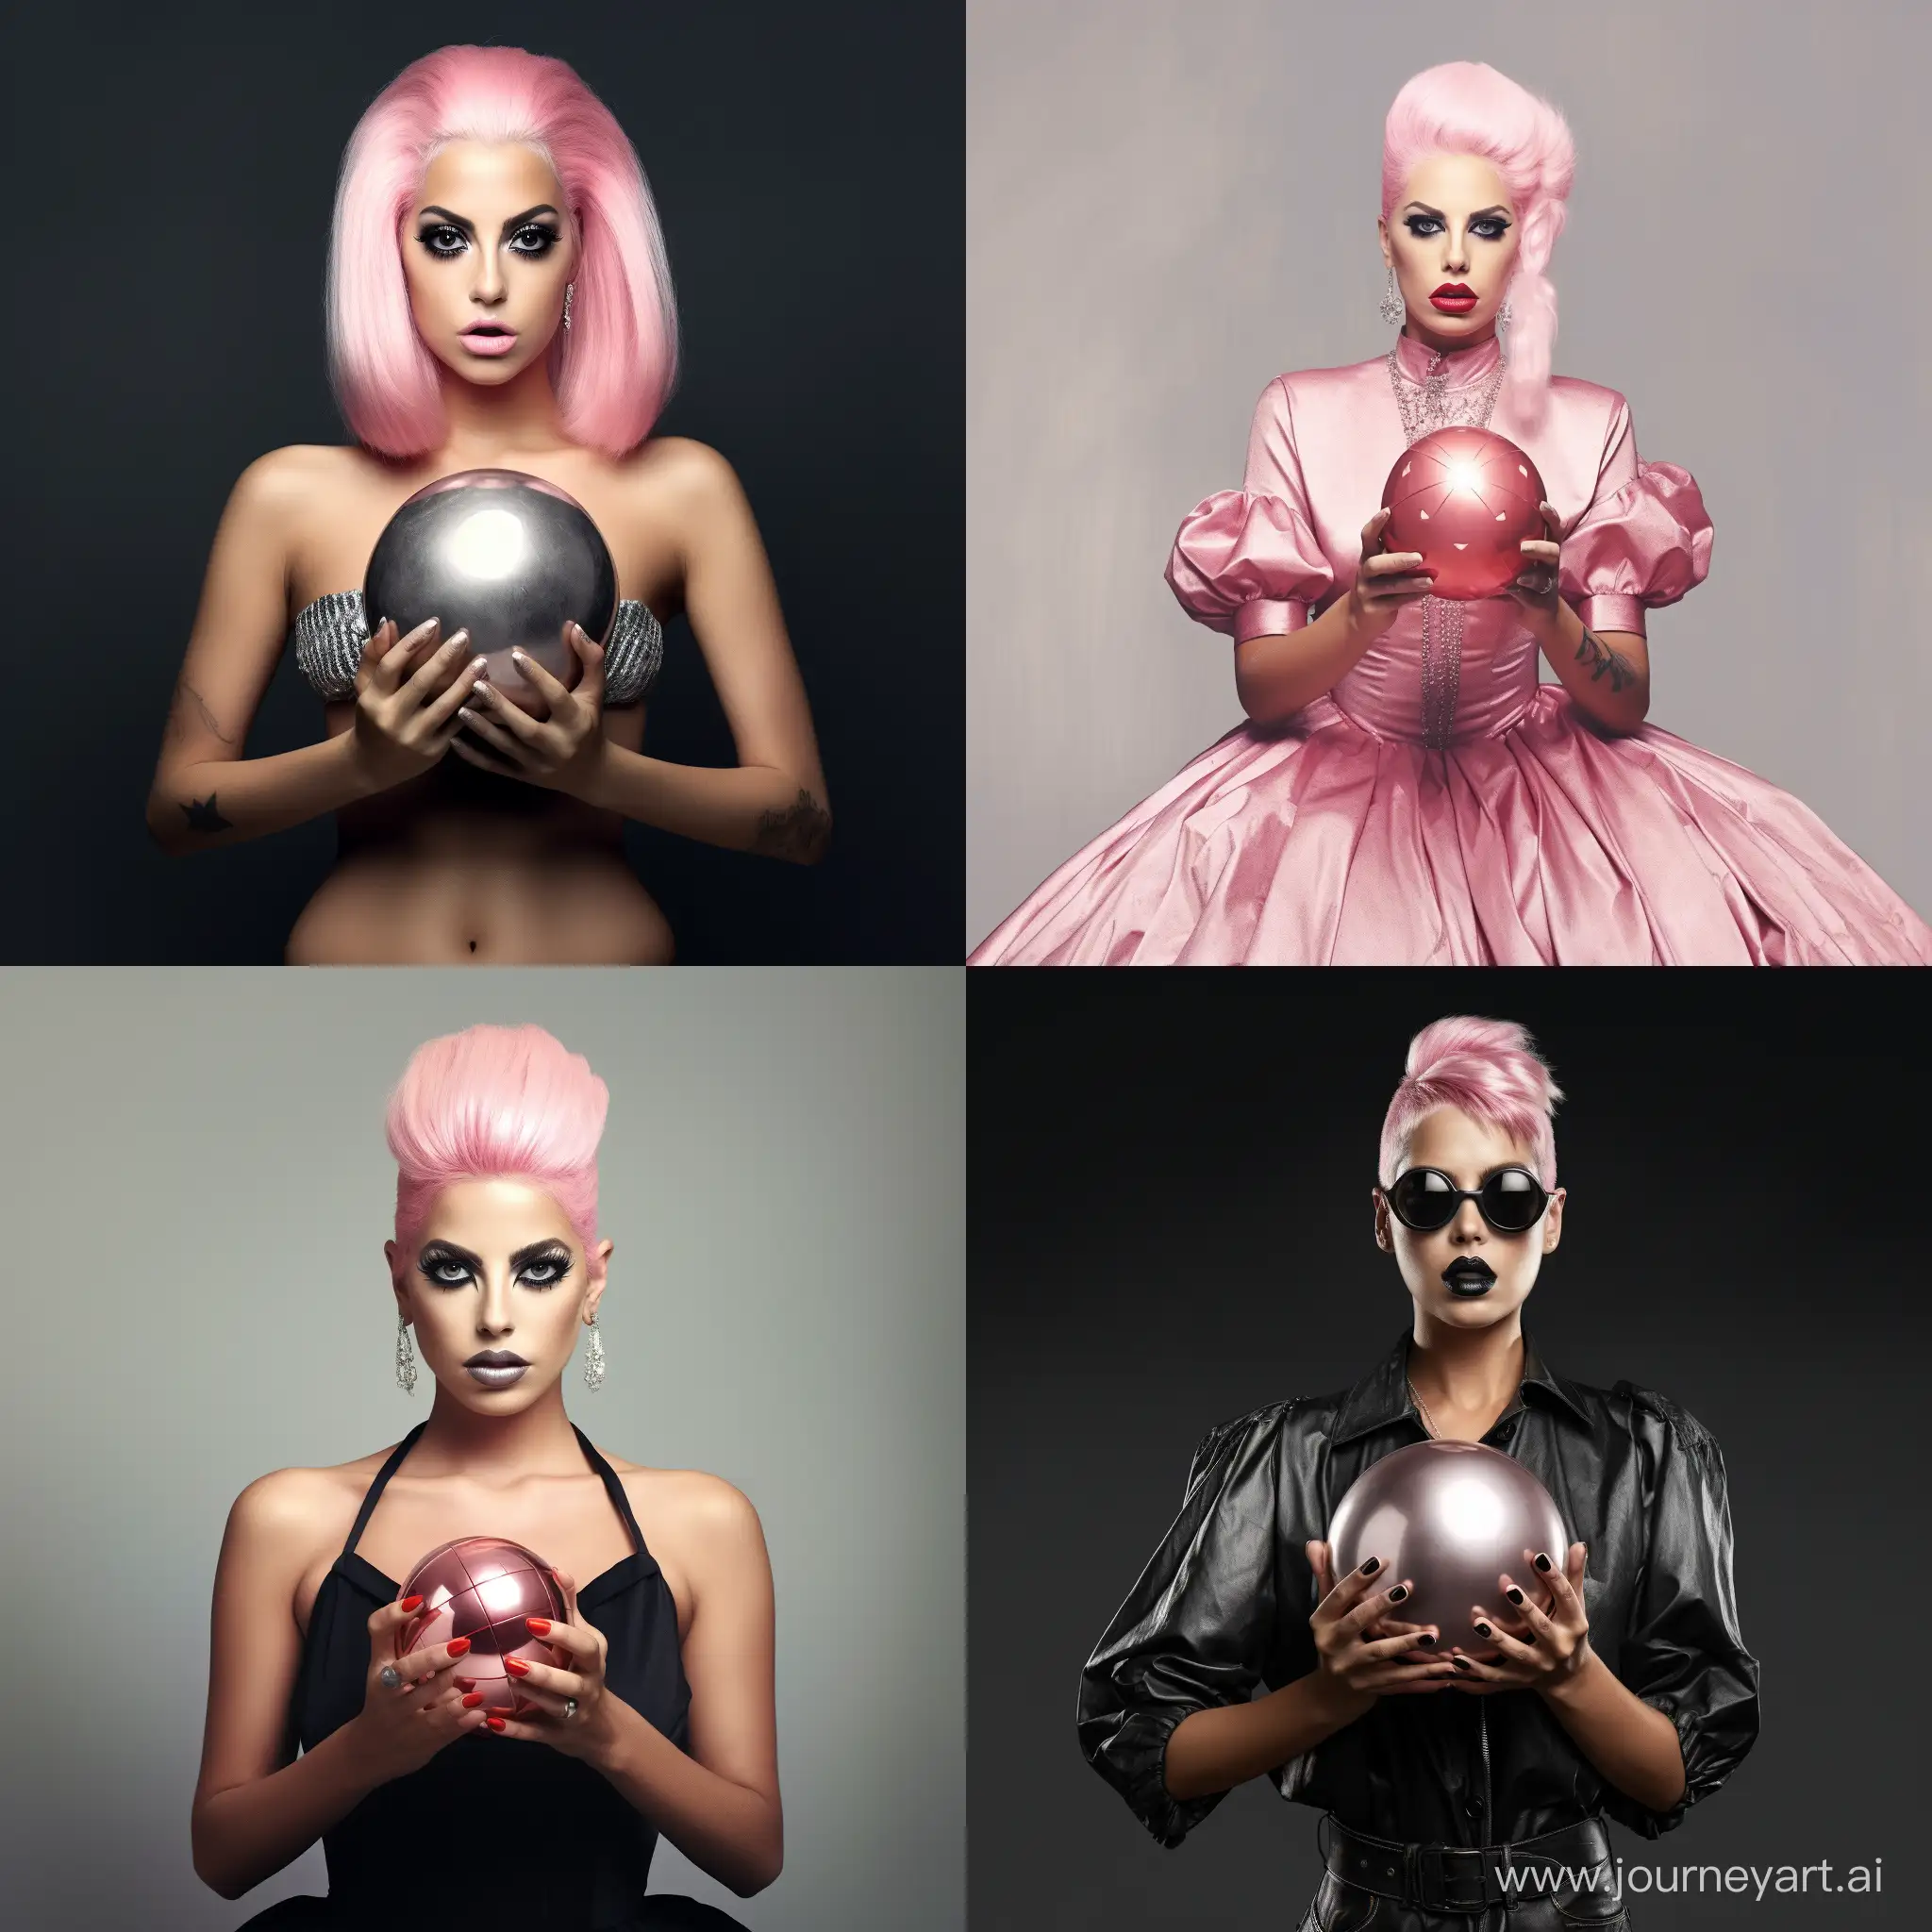 Lady-Gaga-Embracing-Futuristic-Glamour-with-Pink-Hairstyle-and-Chrome-Ball